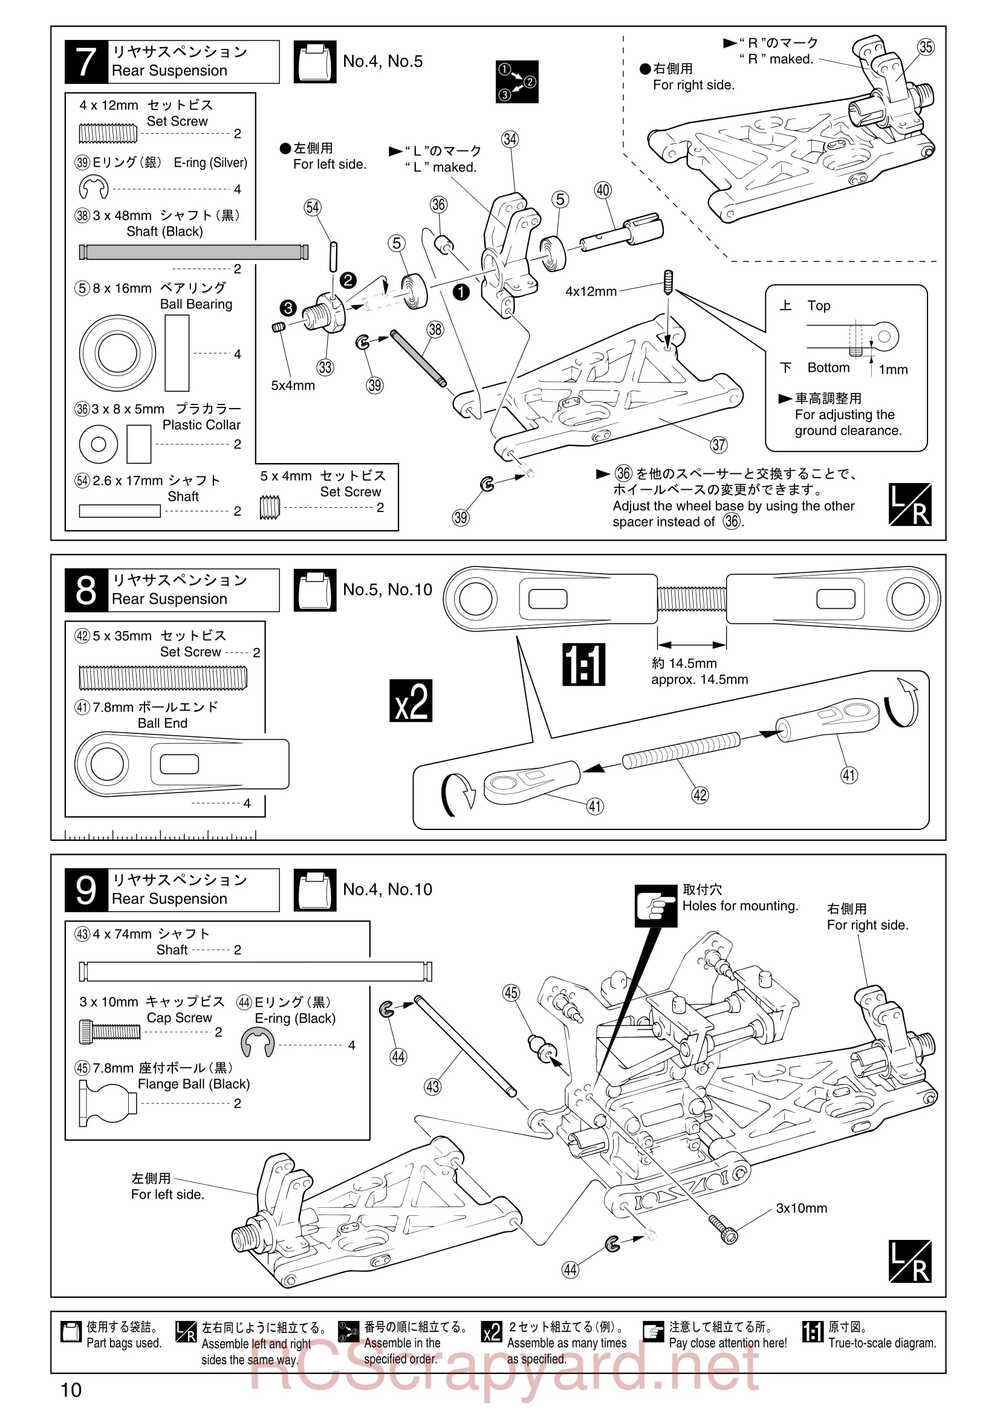 Kyosho - 31081- Inferno-MP-7-5 - Manual - Page 10